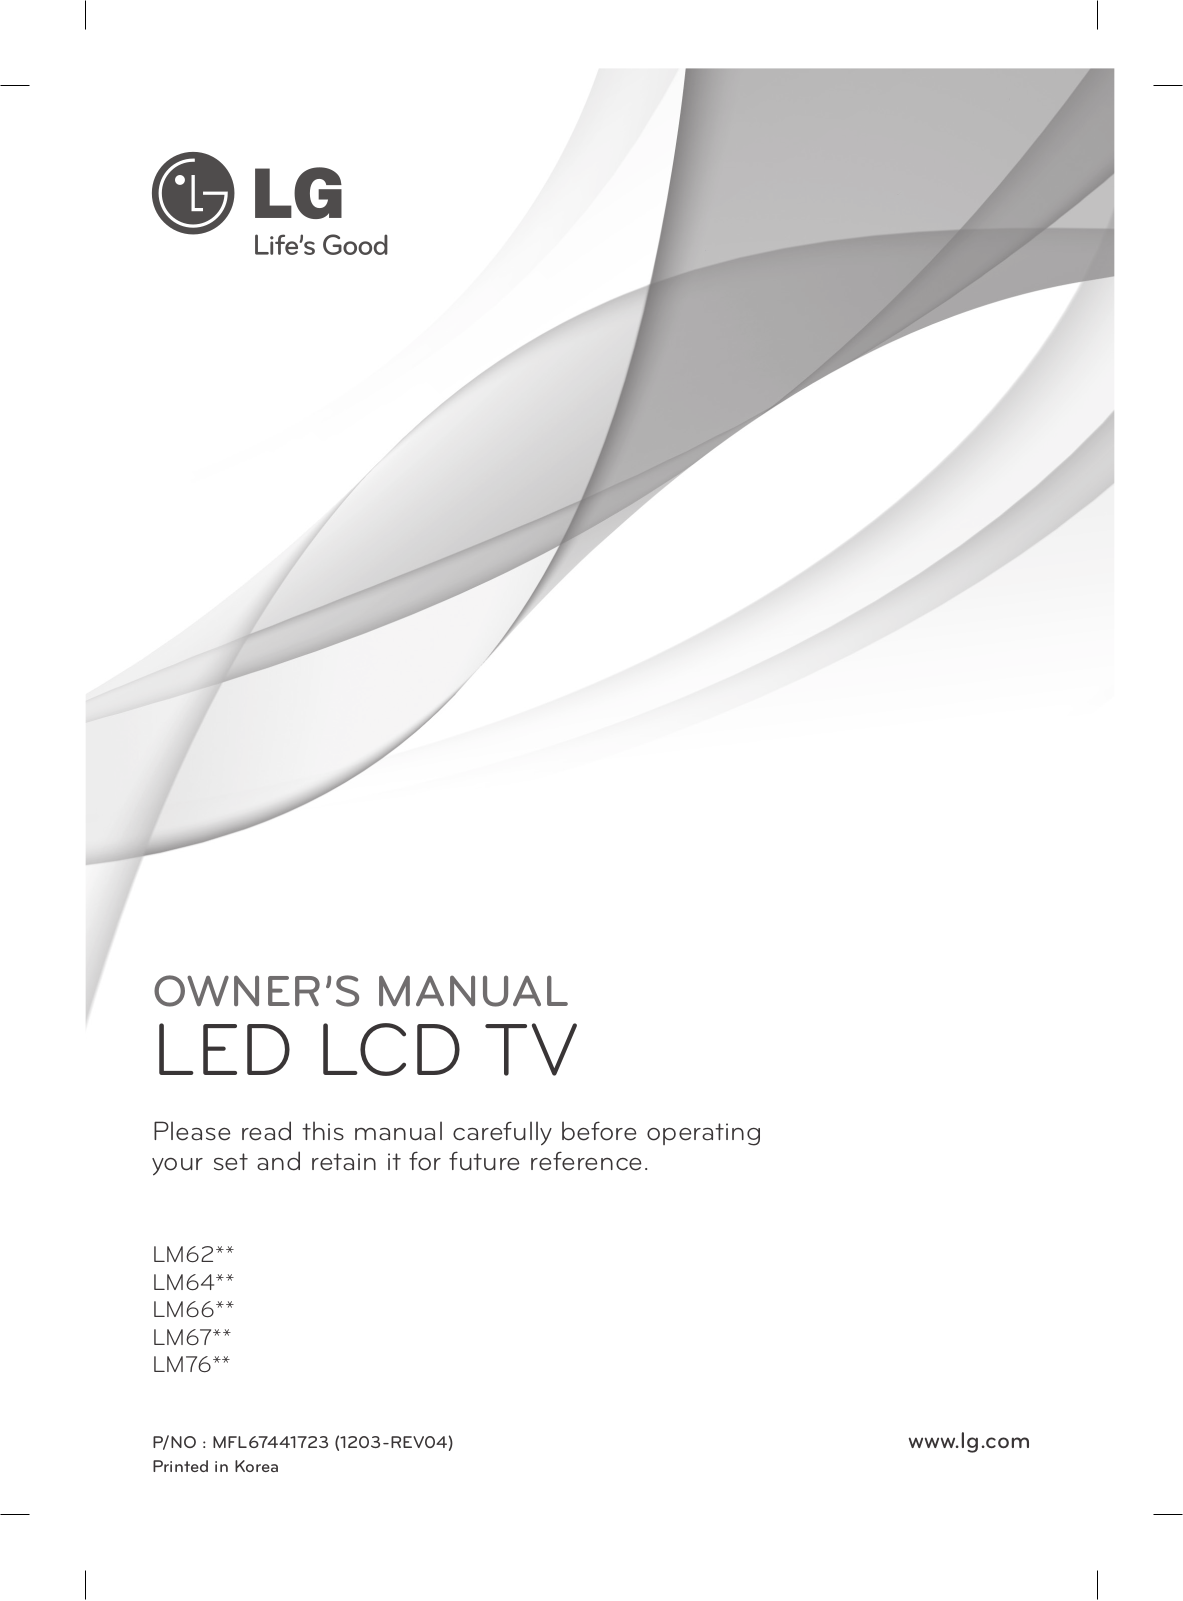 LG 42LM6690, 47LM6690, 42LM7600, 47LM7600 Owner’s Manual